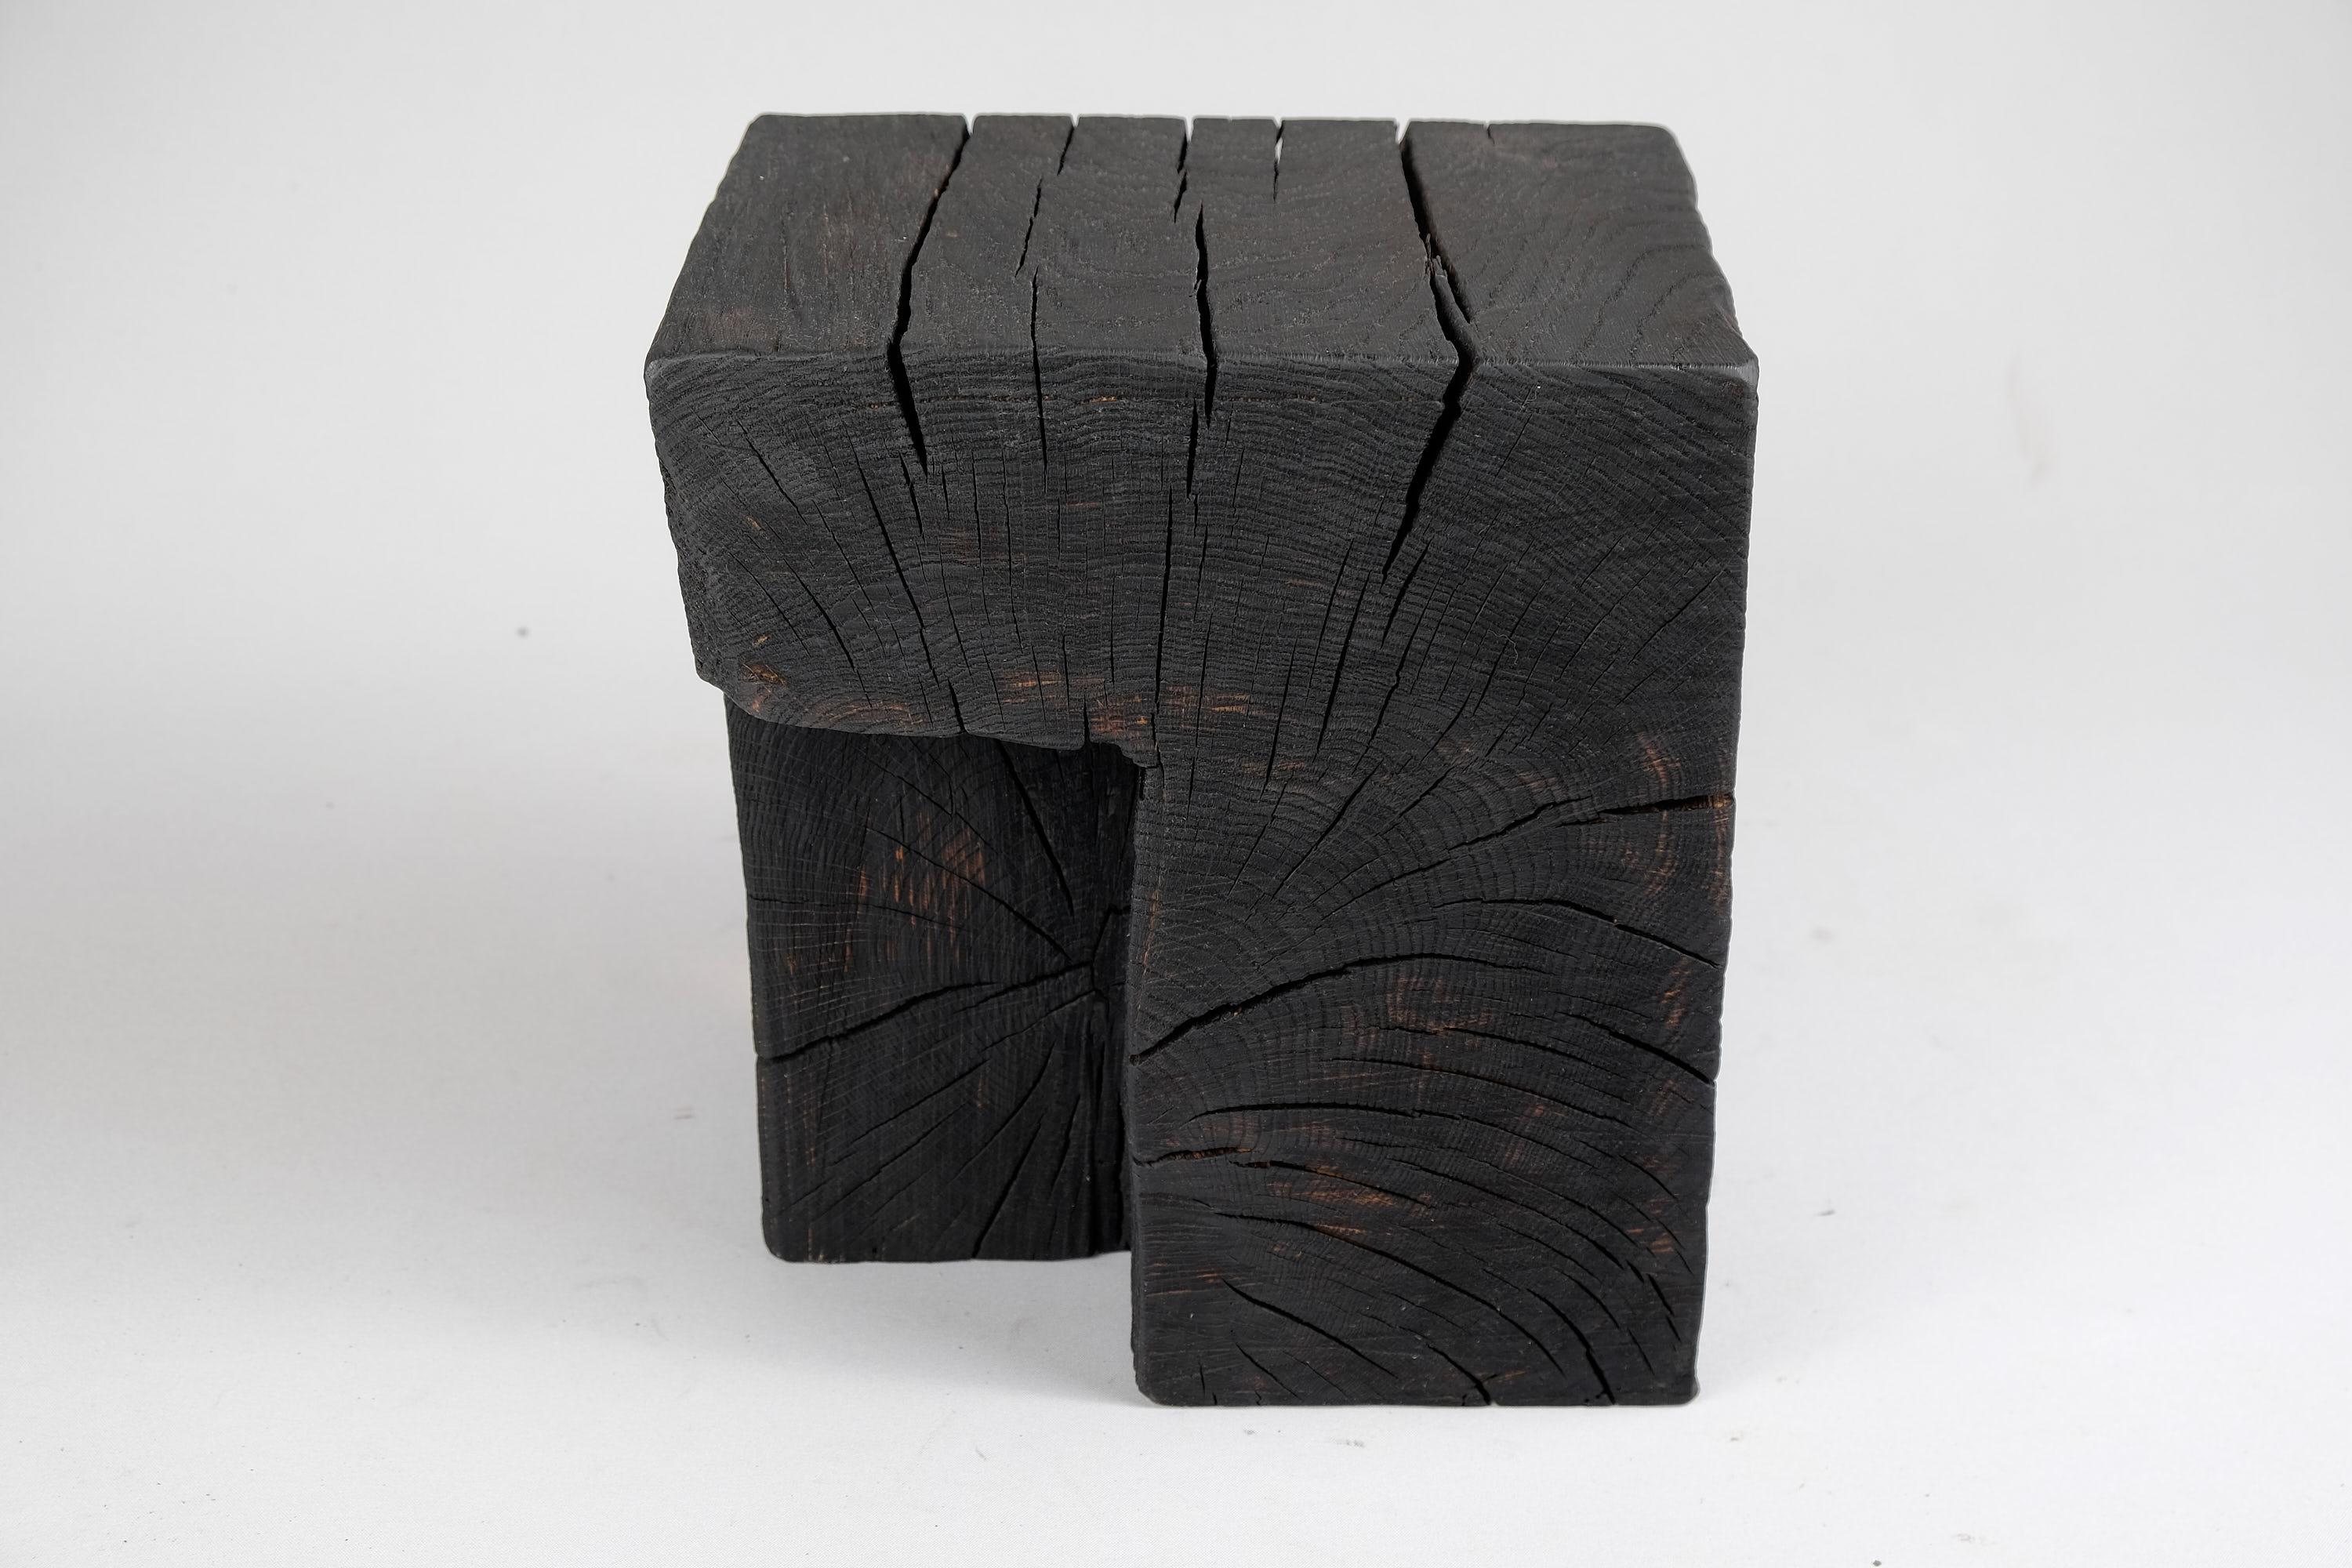 Carved Solid Burnt Wood, Side Table, Stool, Original Contemporary Primative Design For Sale